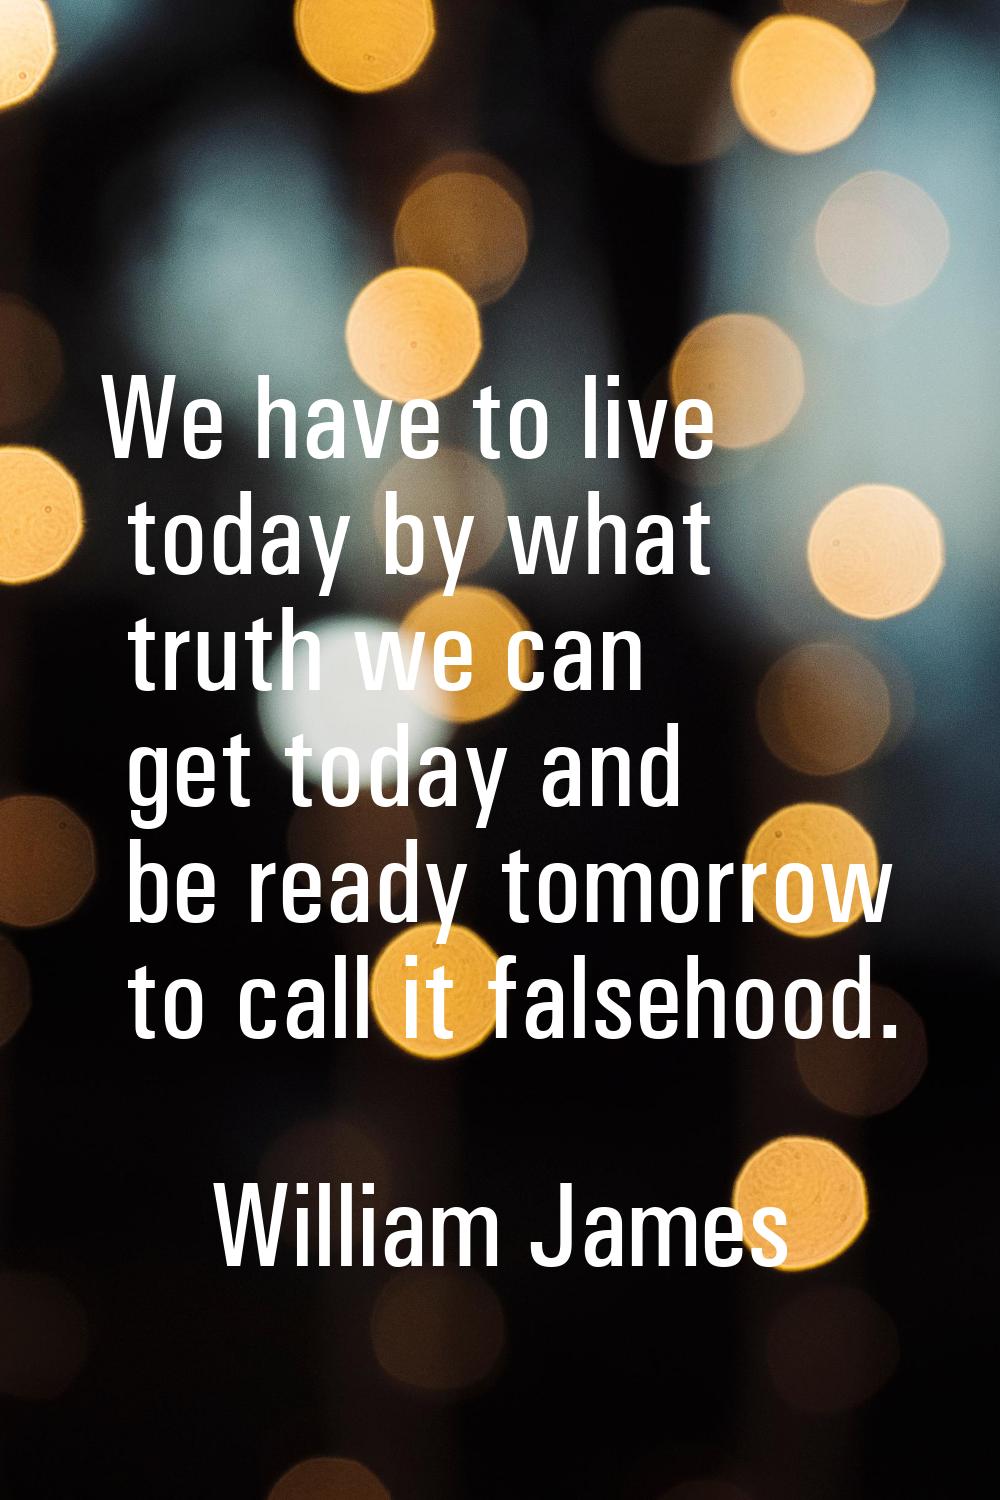 We have to live today by what truth we can get today and be ready tomorrow to call it falsehood.